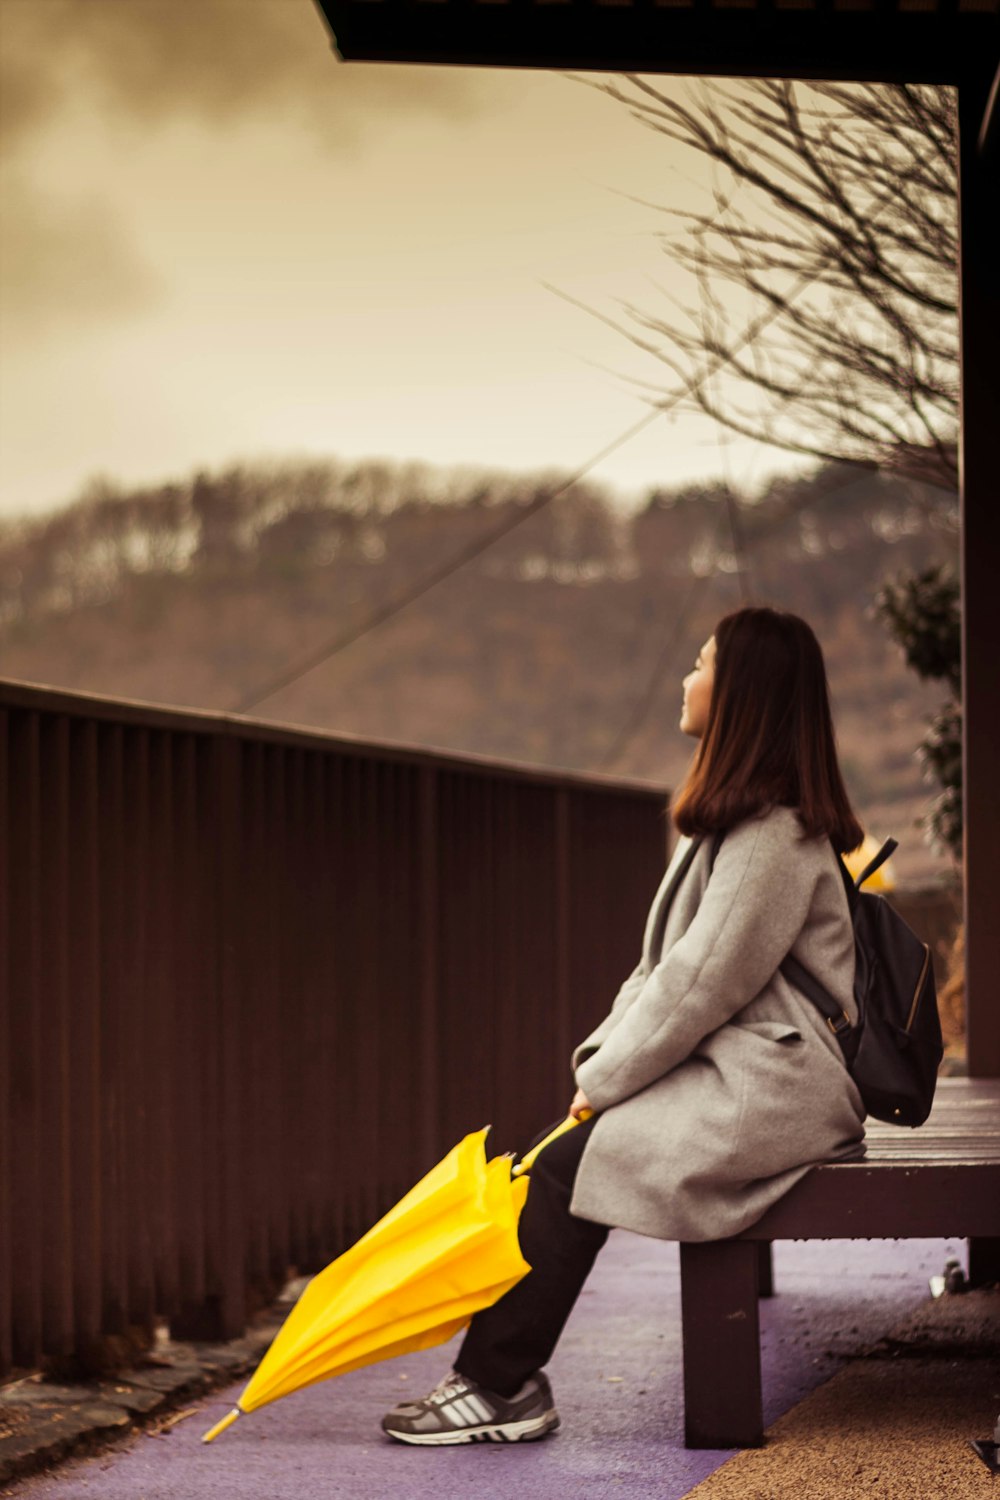 a woman sitting on a bench holding a yellow umbrella